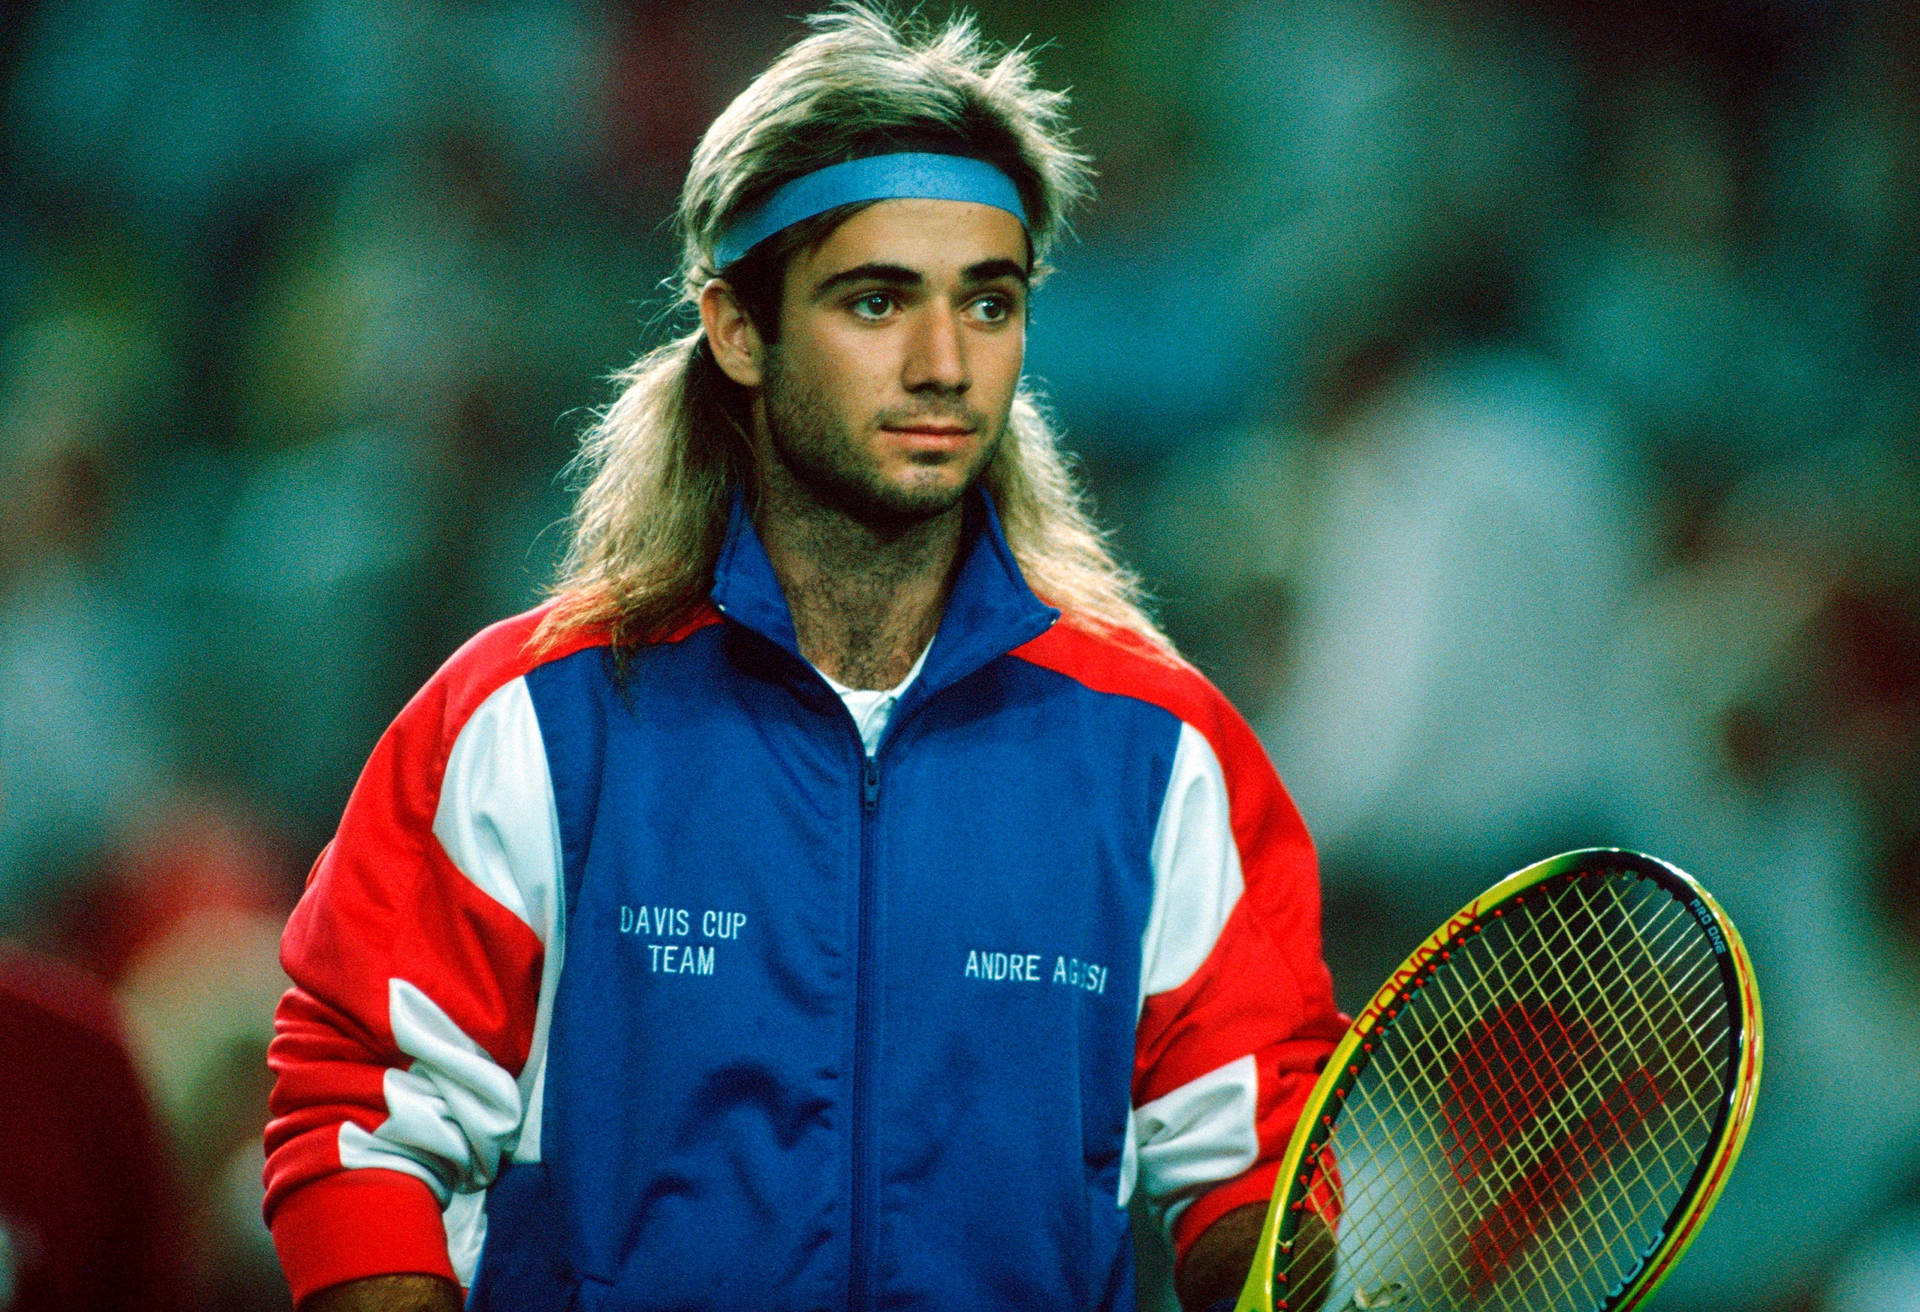 Andre Agassi Sporting Blue Headband on Tennis Court Wallpaper